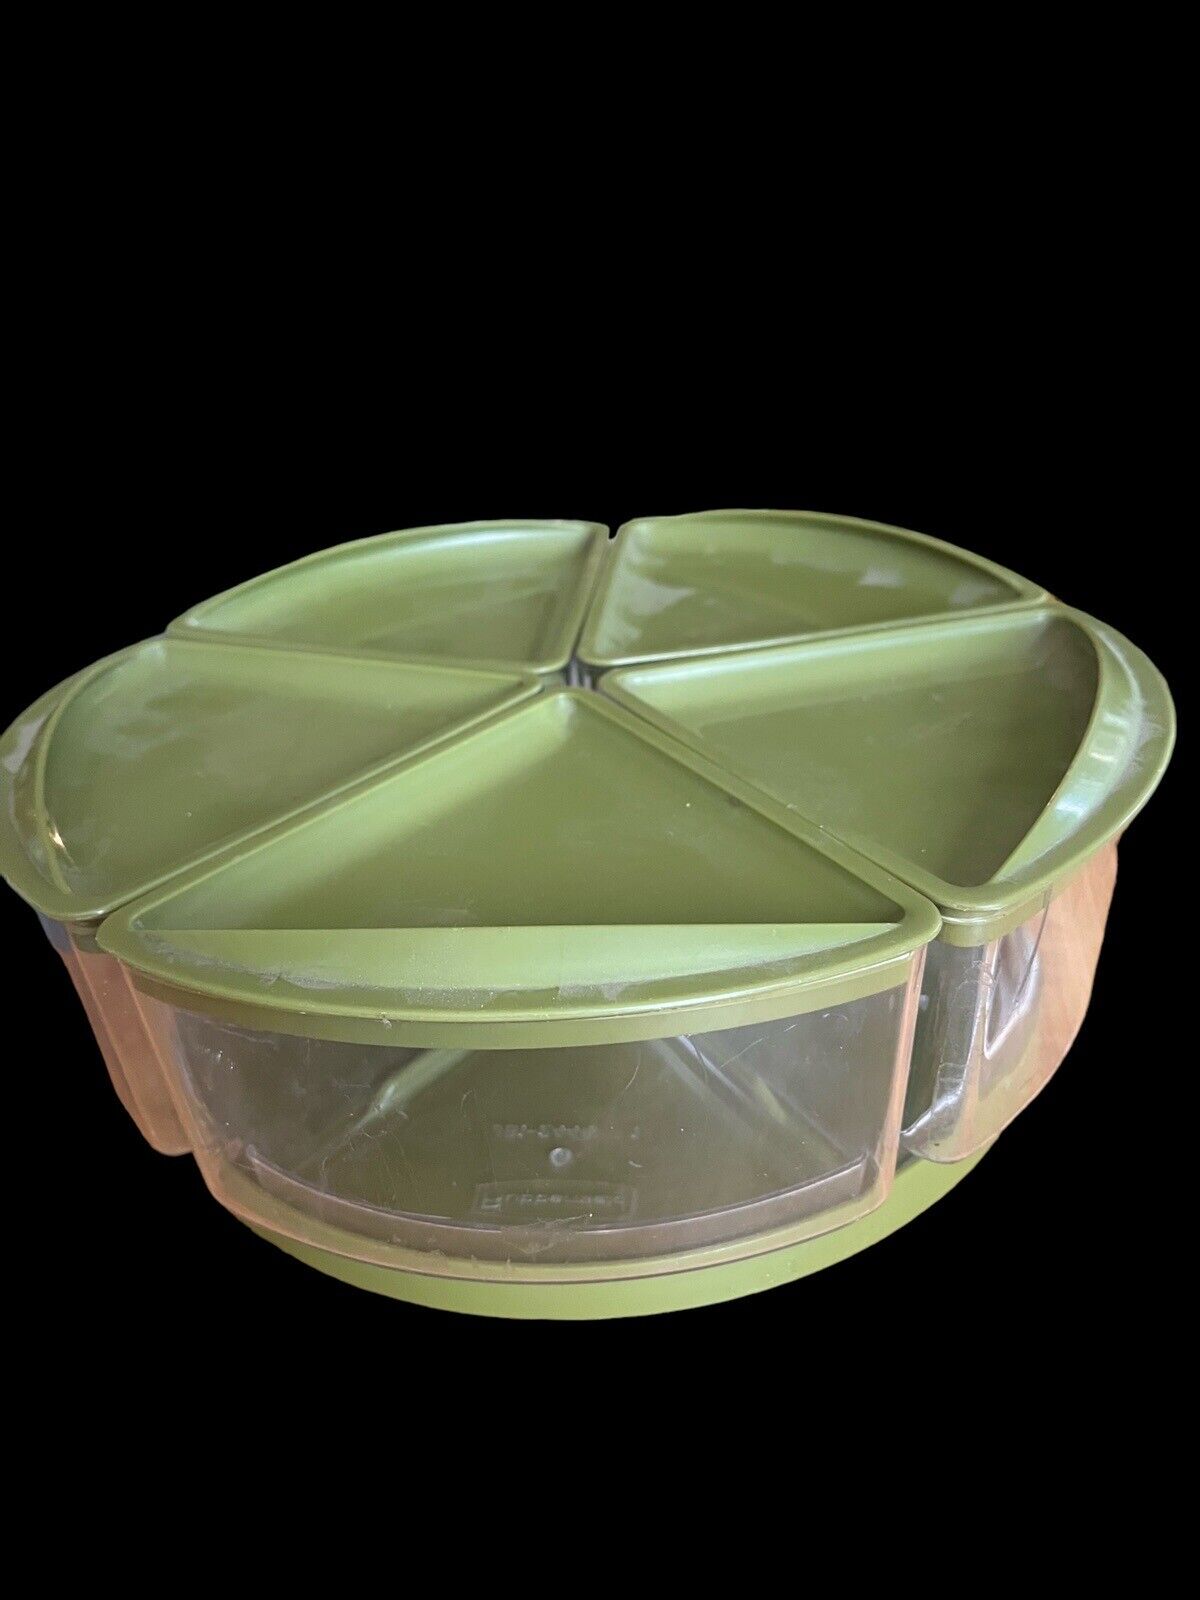 Vintage Rubbermaid Green Lazy Susan Witn 5 Pie Shaped Containers With Lids